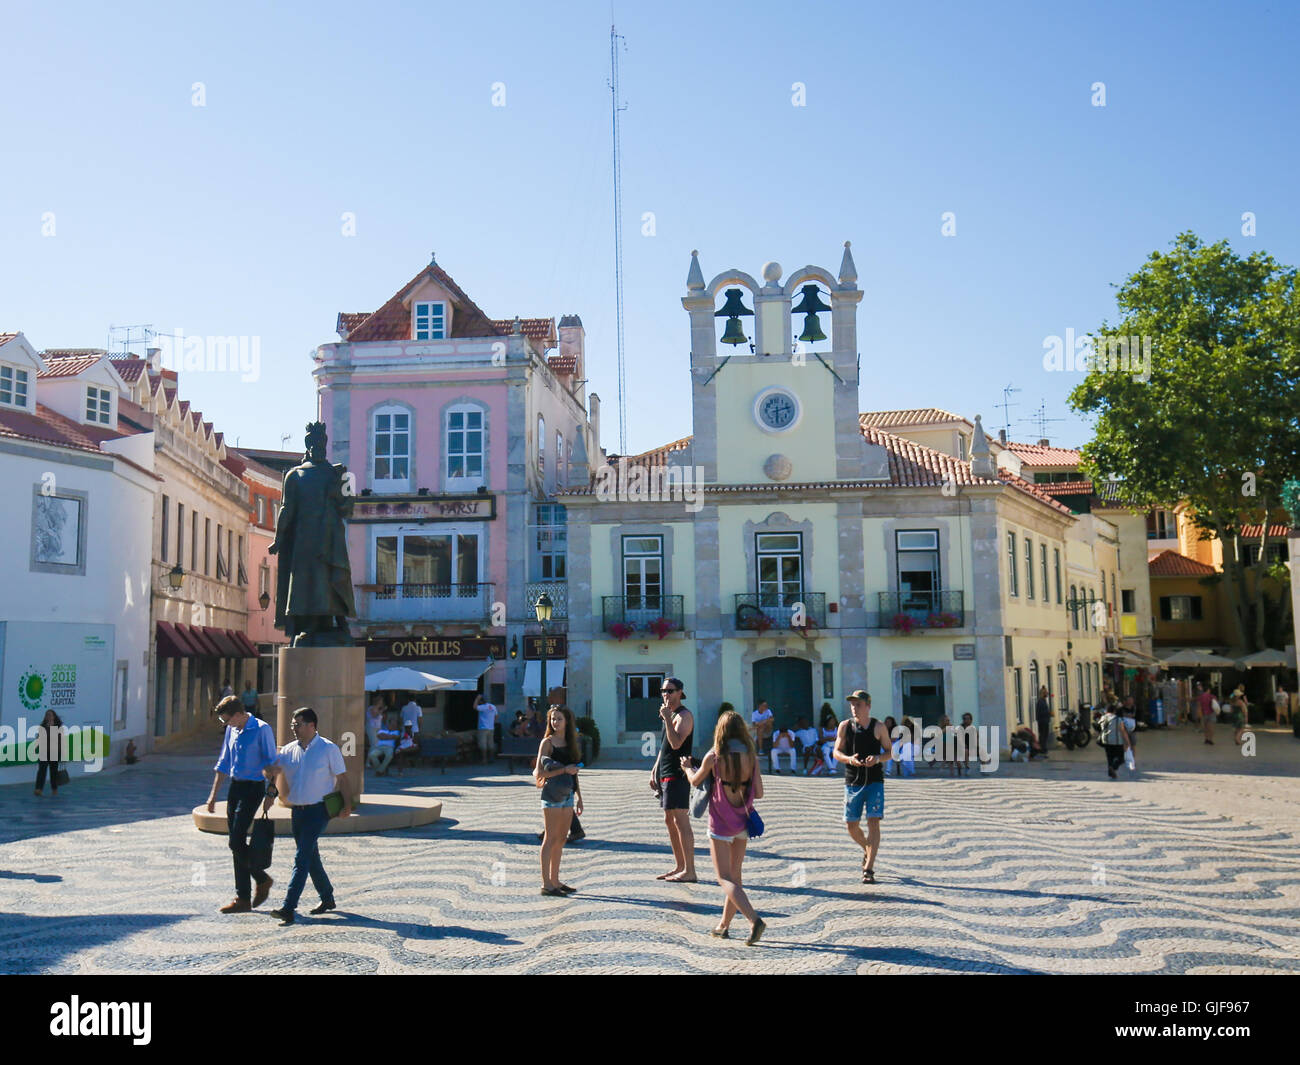 CASCAIS, PORTUGAL - JULY 15, 2016: Central square in Cascais with statue of Dom Pedro I, Lisbon, Portugal Stock Photo